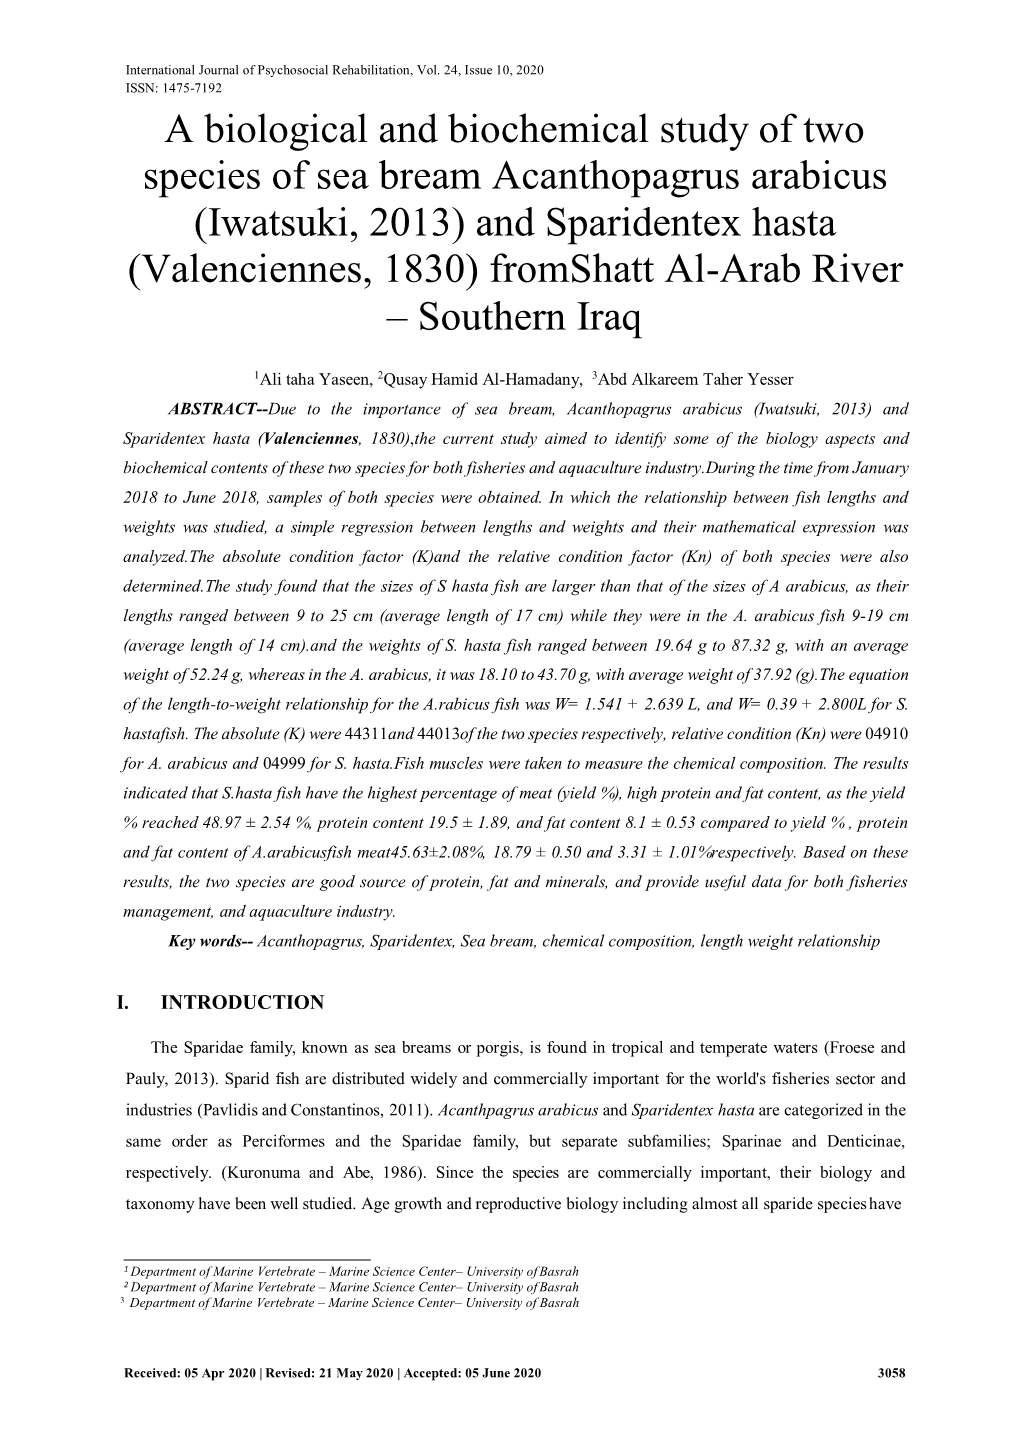 A Biological and Biochemical Study of Two Species of Sea Bream